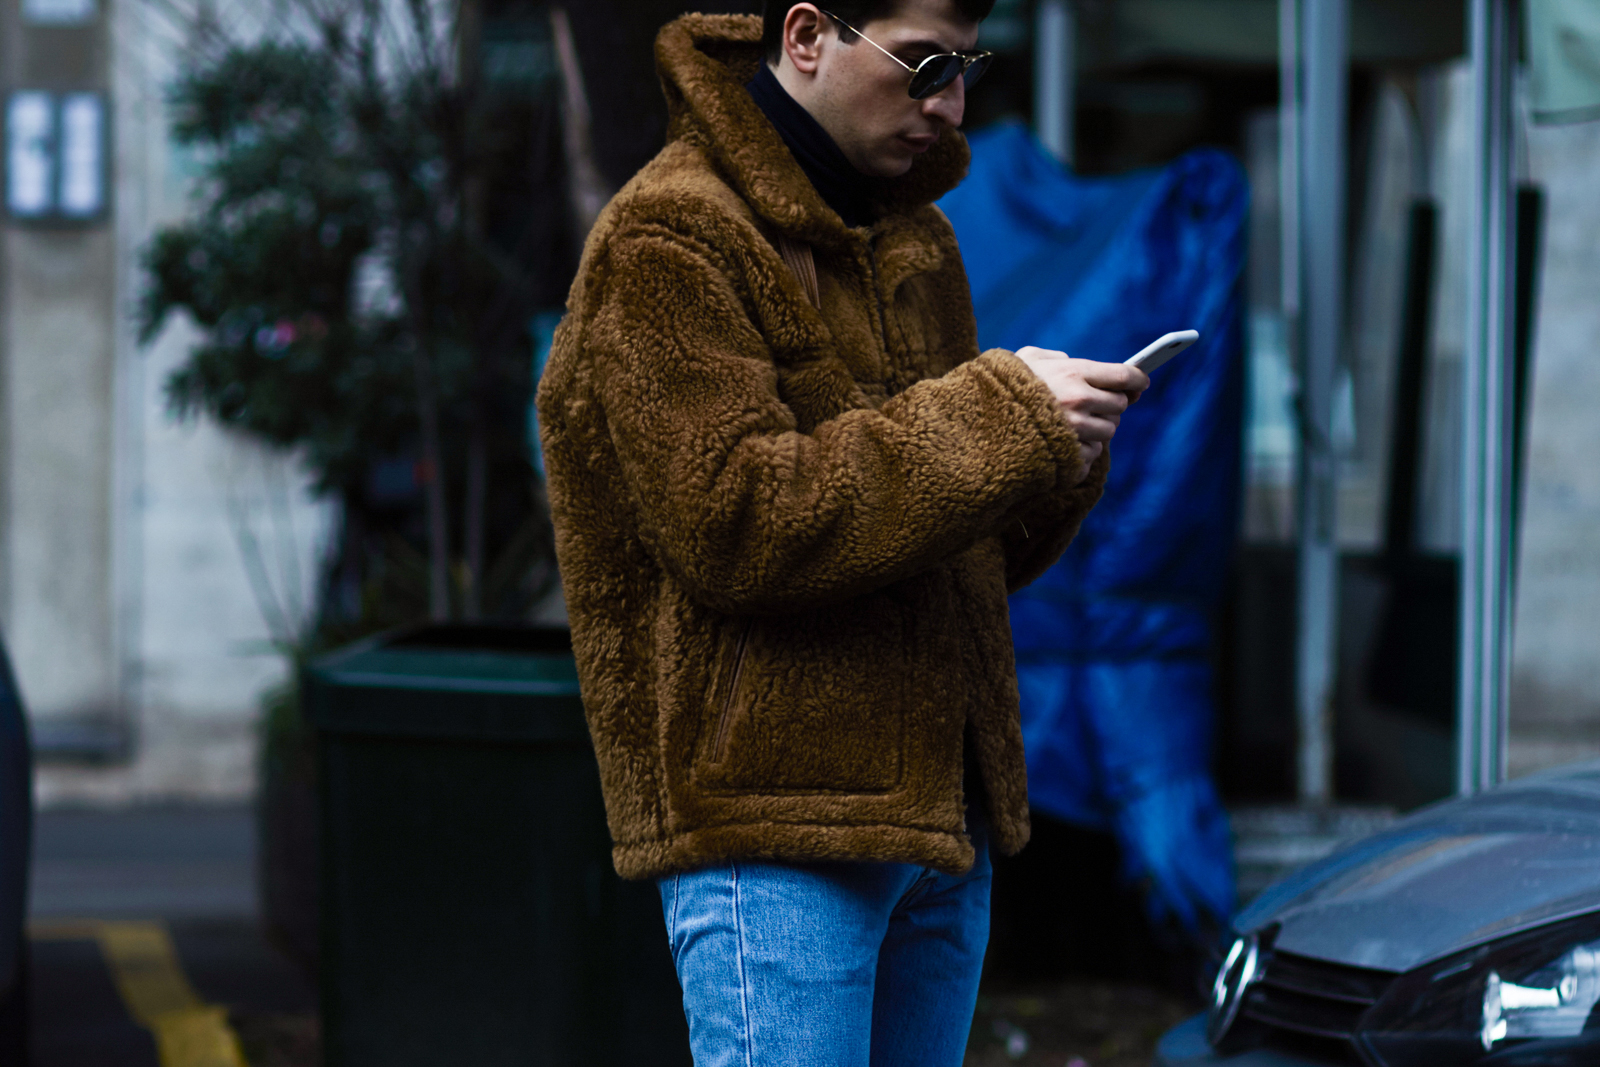 MFW Street Style: Fashion editor Konstantin Spachis wearing a shearling jacket and jeans after a show in Milan, Italy